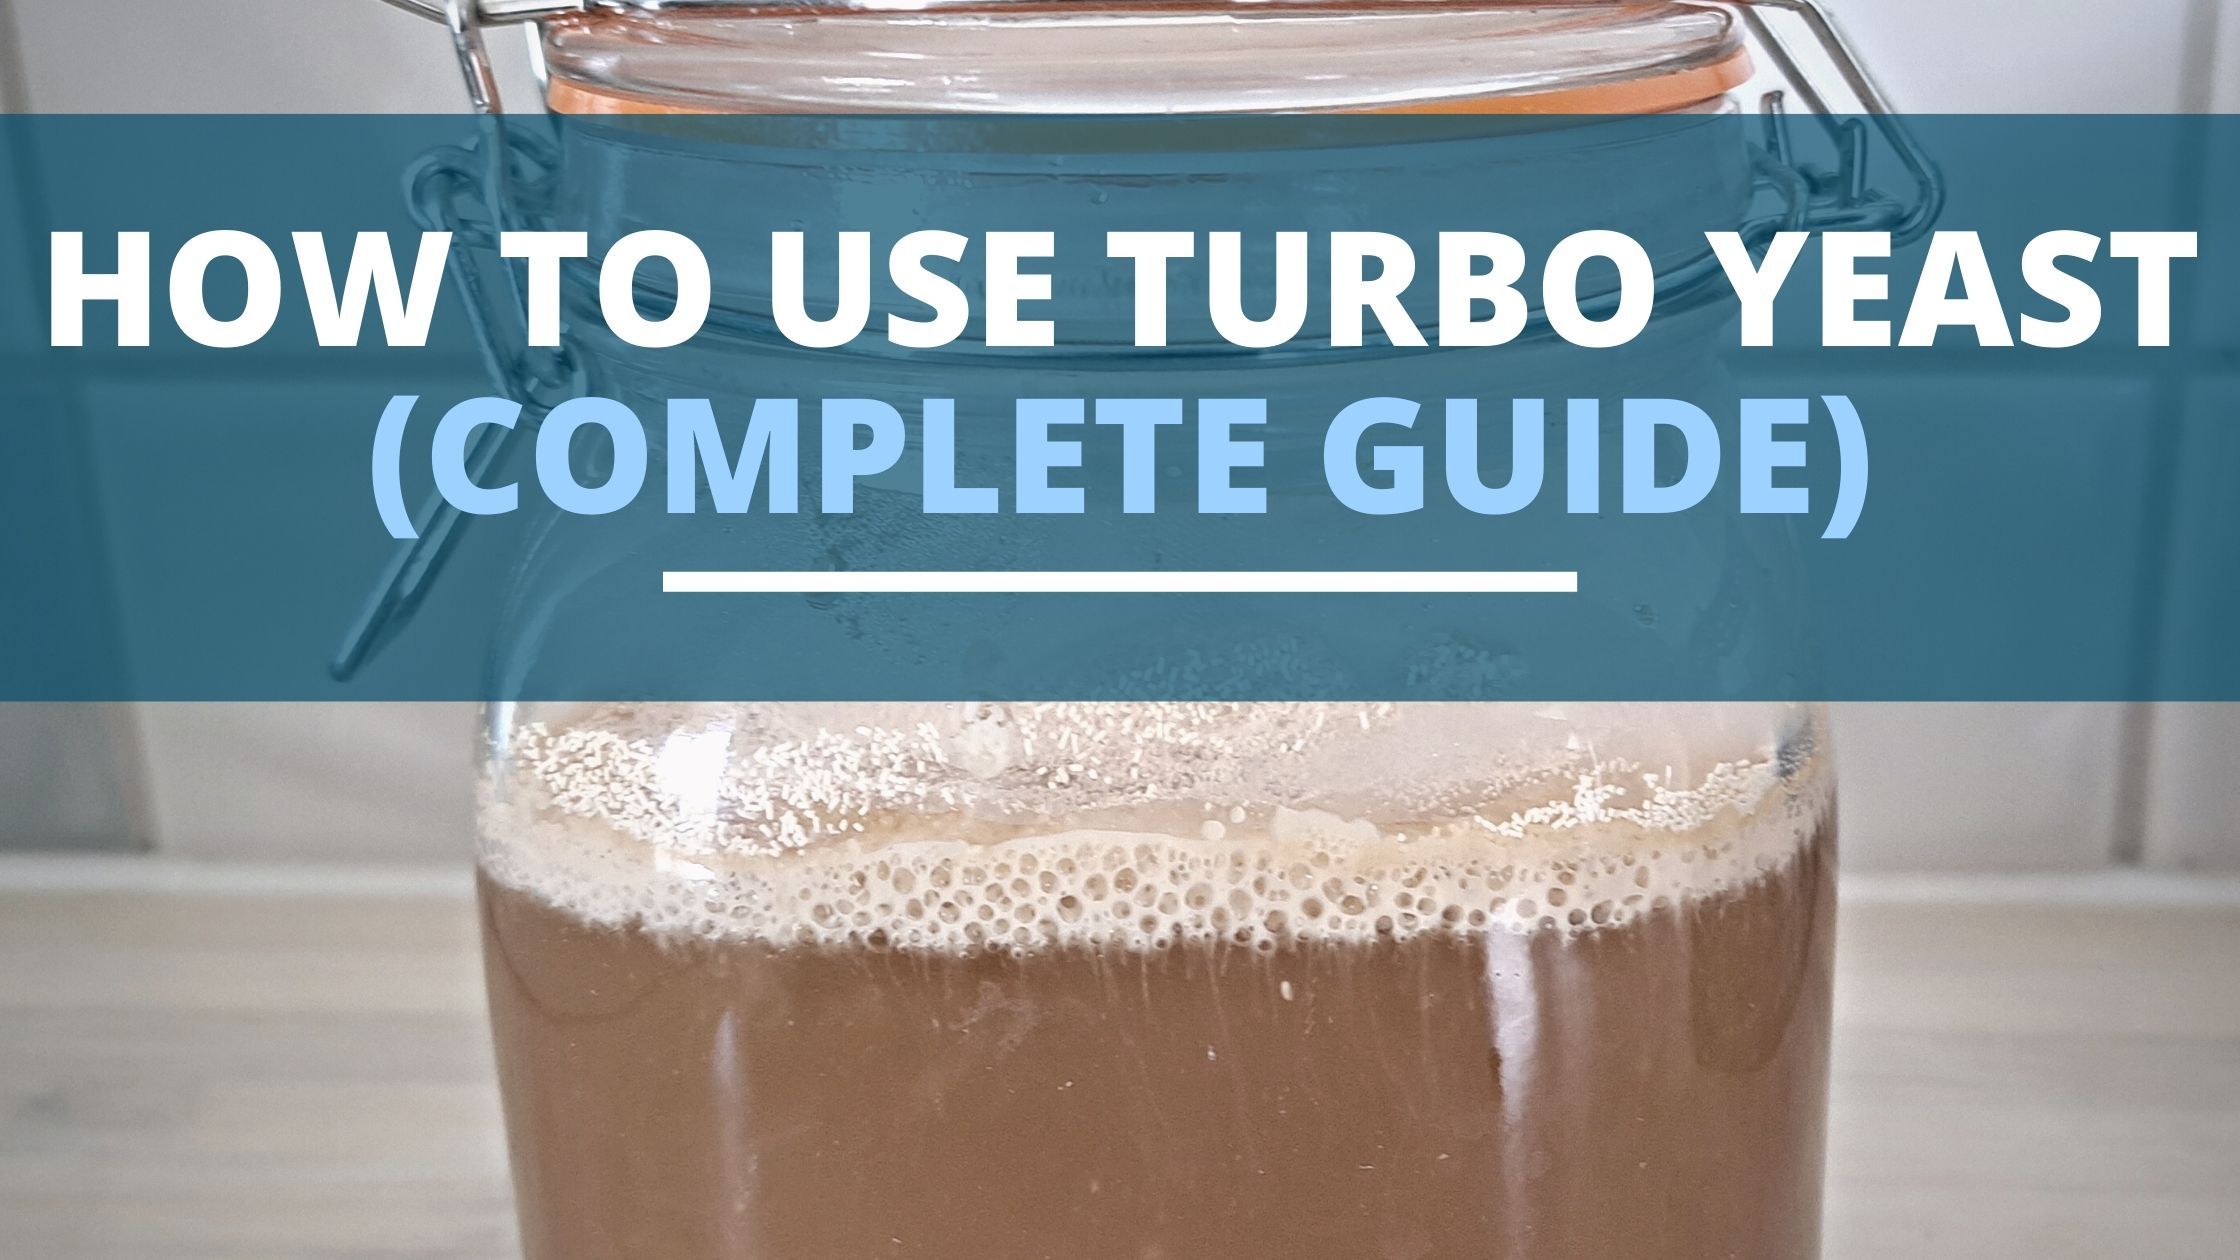 How to use turbo yeast (step by step)